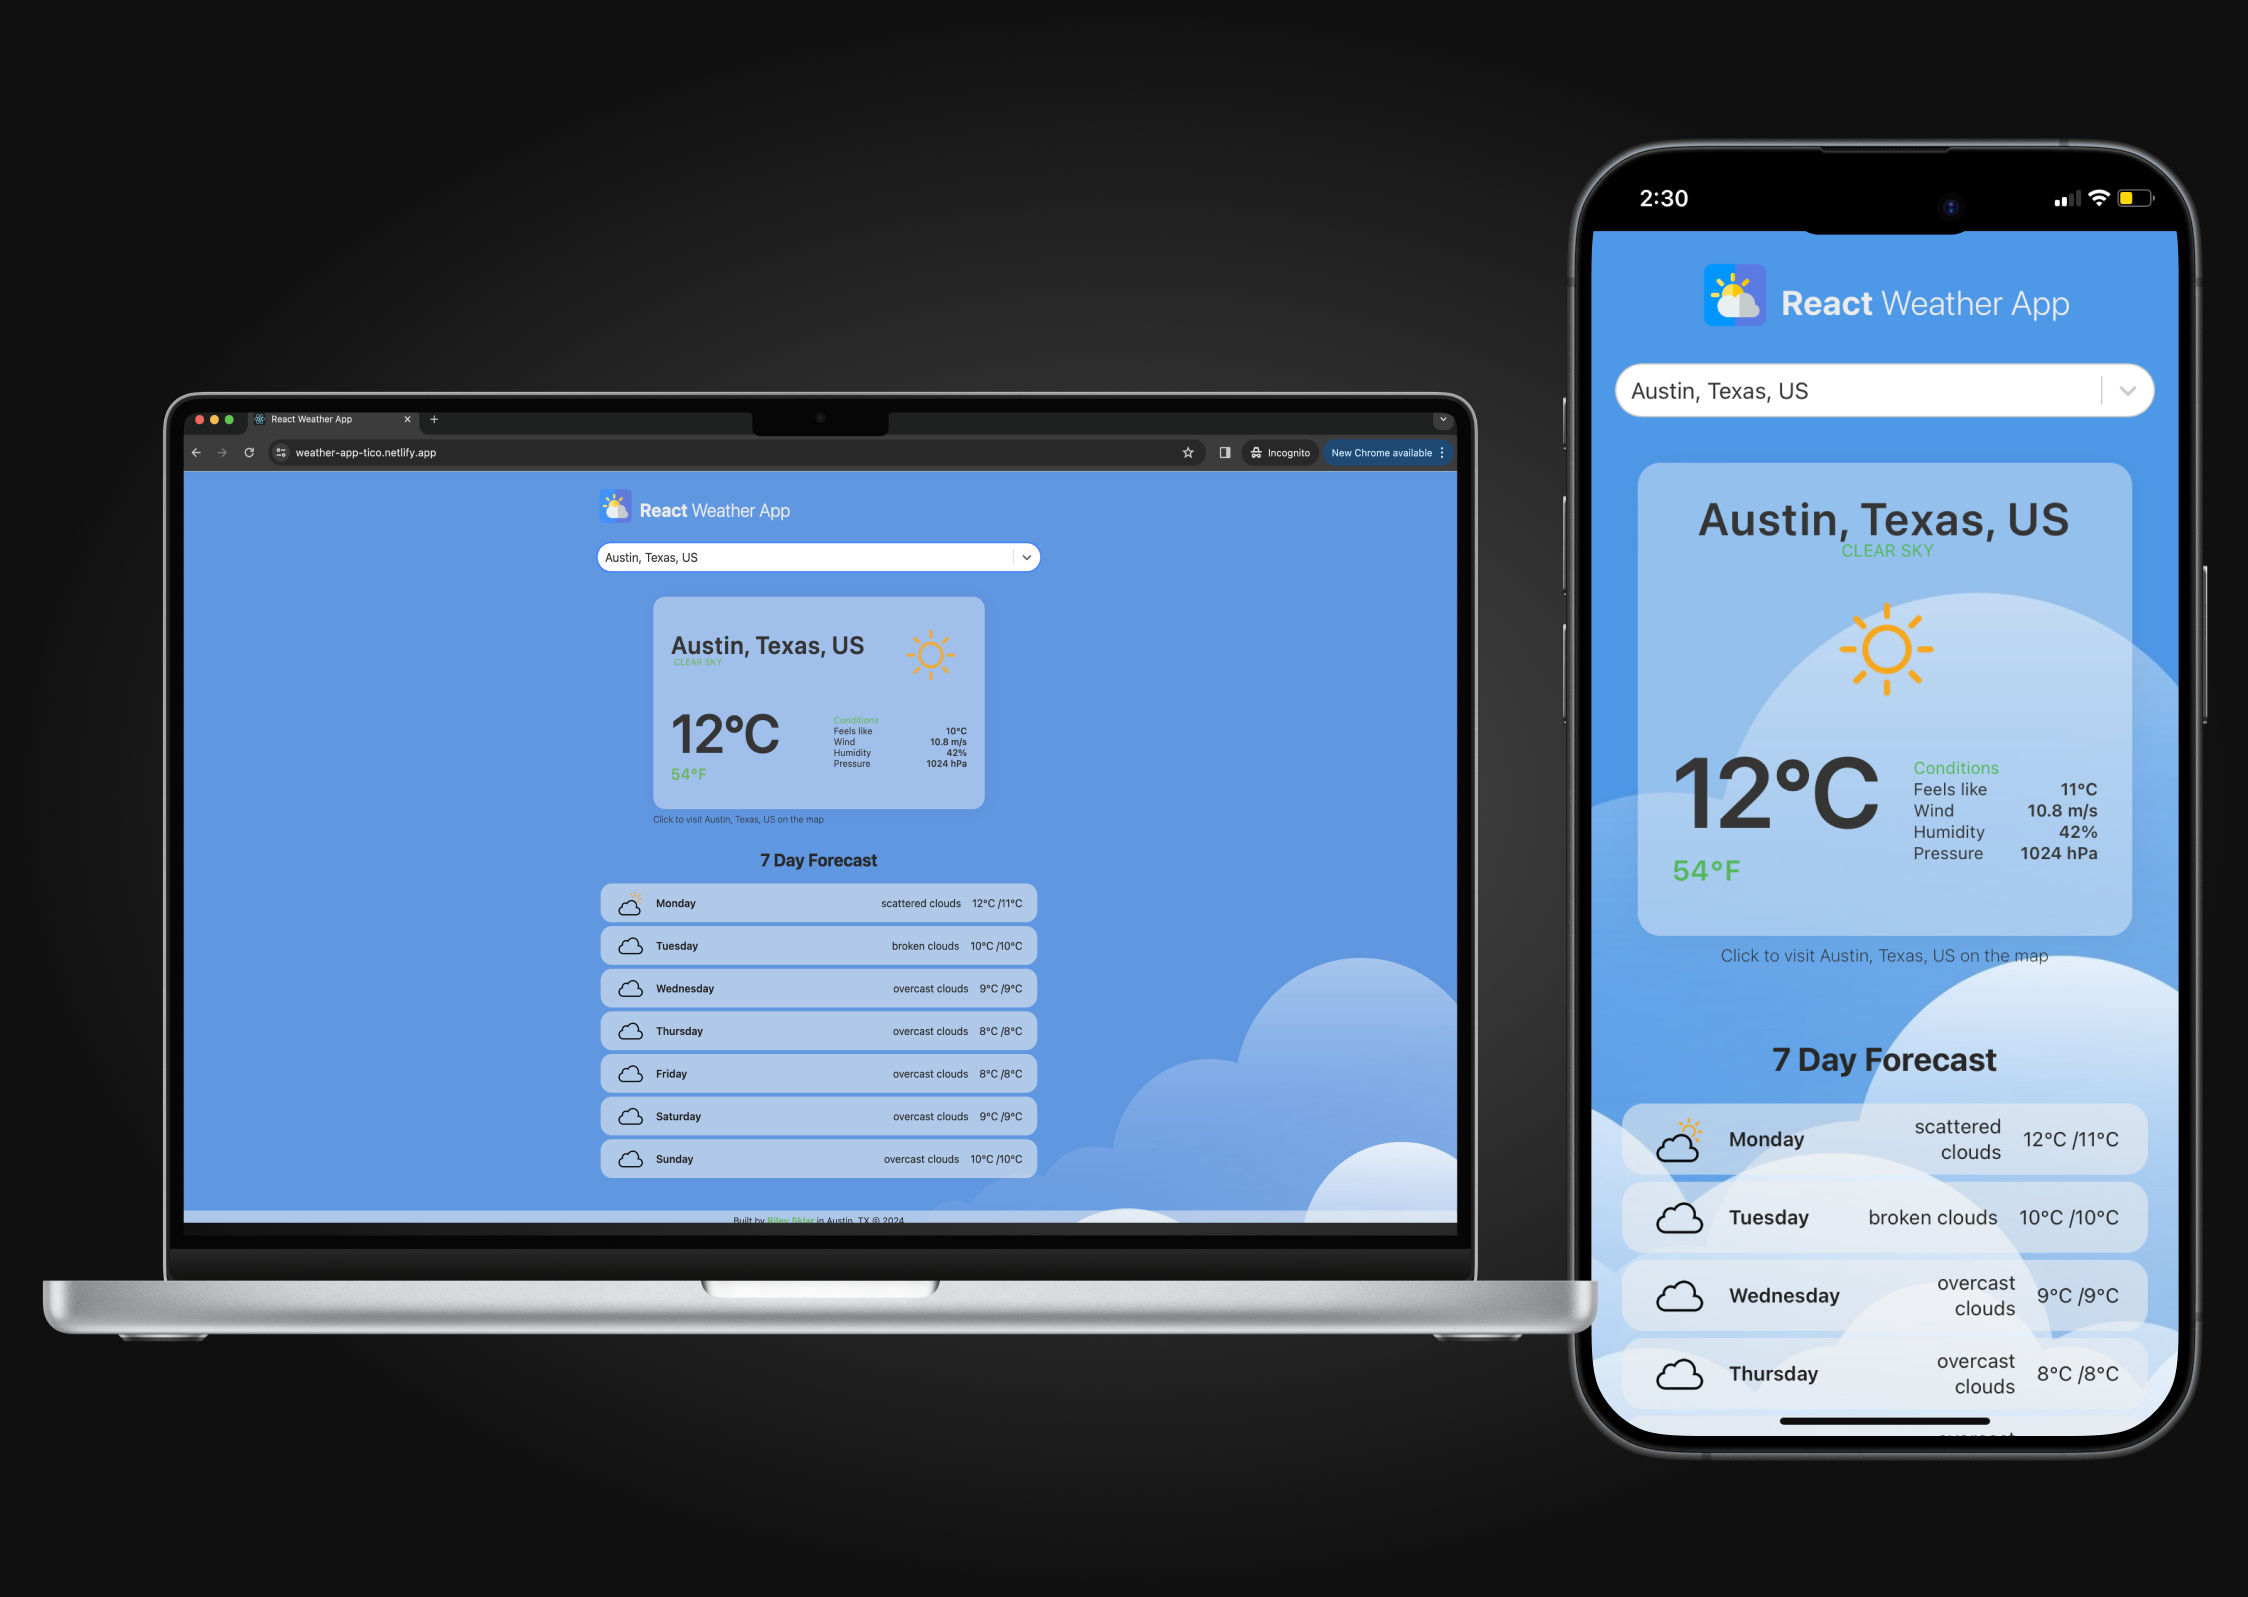 A screenshot showcasing the React Weather App with current weather conditions and forecasts.